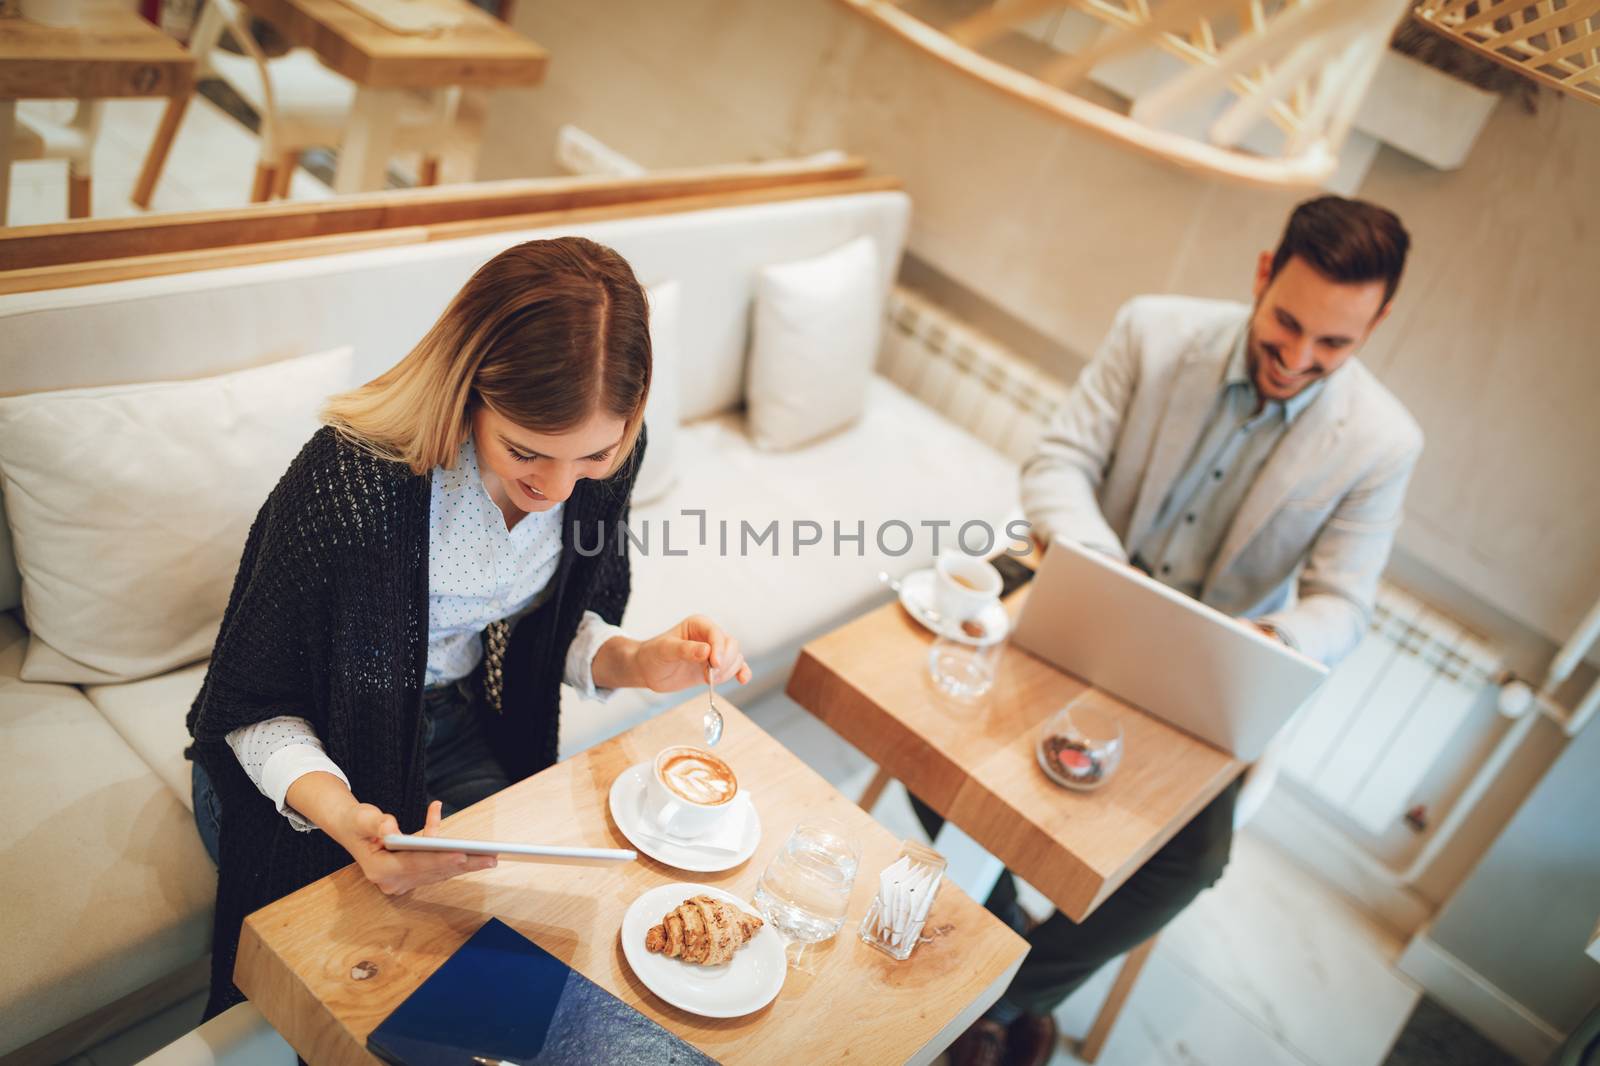 Young businesspeople surfing the internet on a break in a cafe. Smiling woman using digital tablet and drinking coffee. Man working at laptop. Selective focus. Focus on businesswoman.